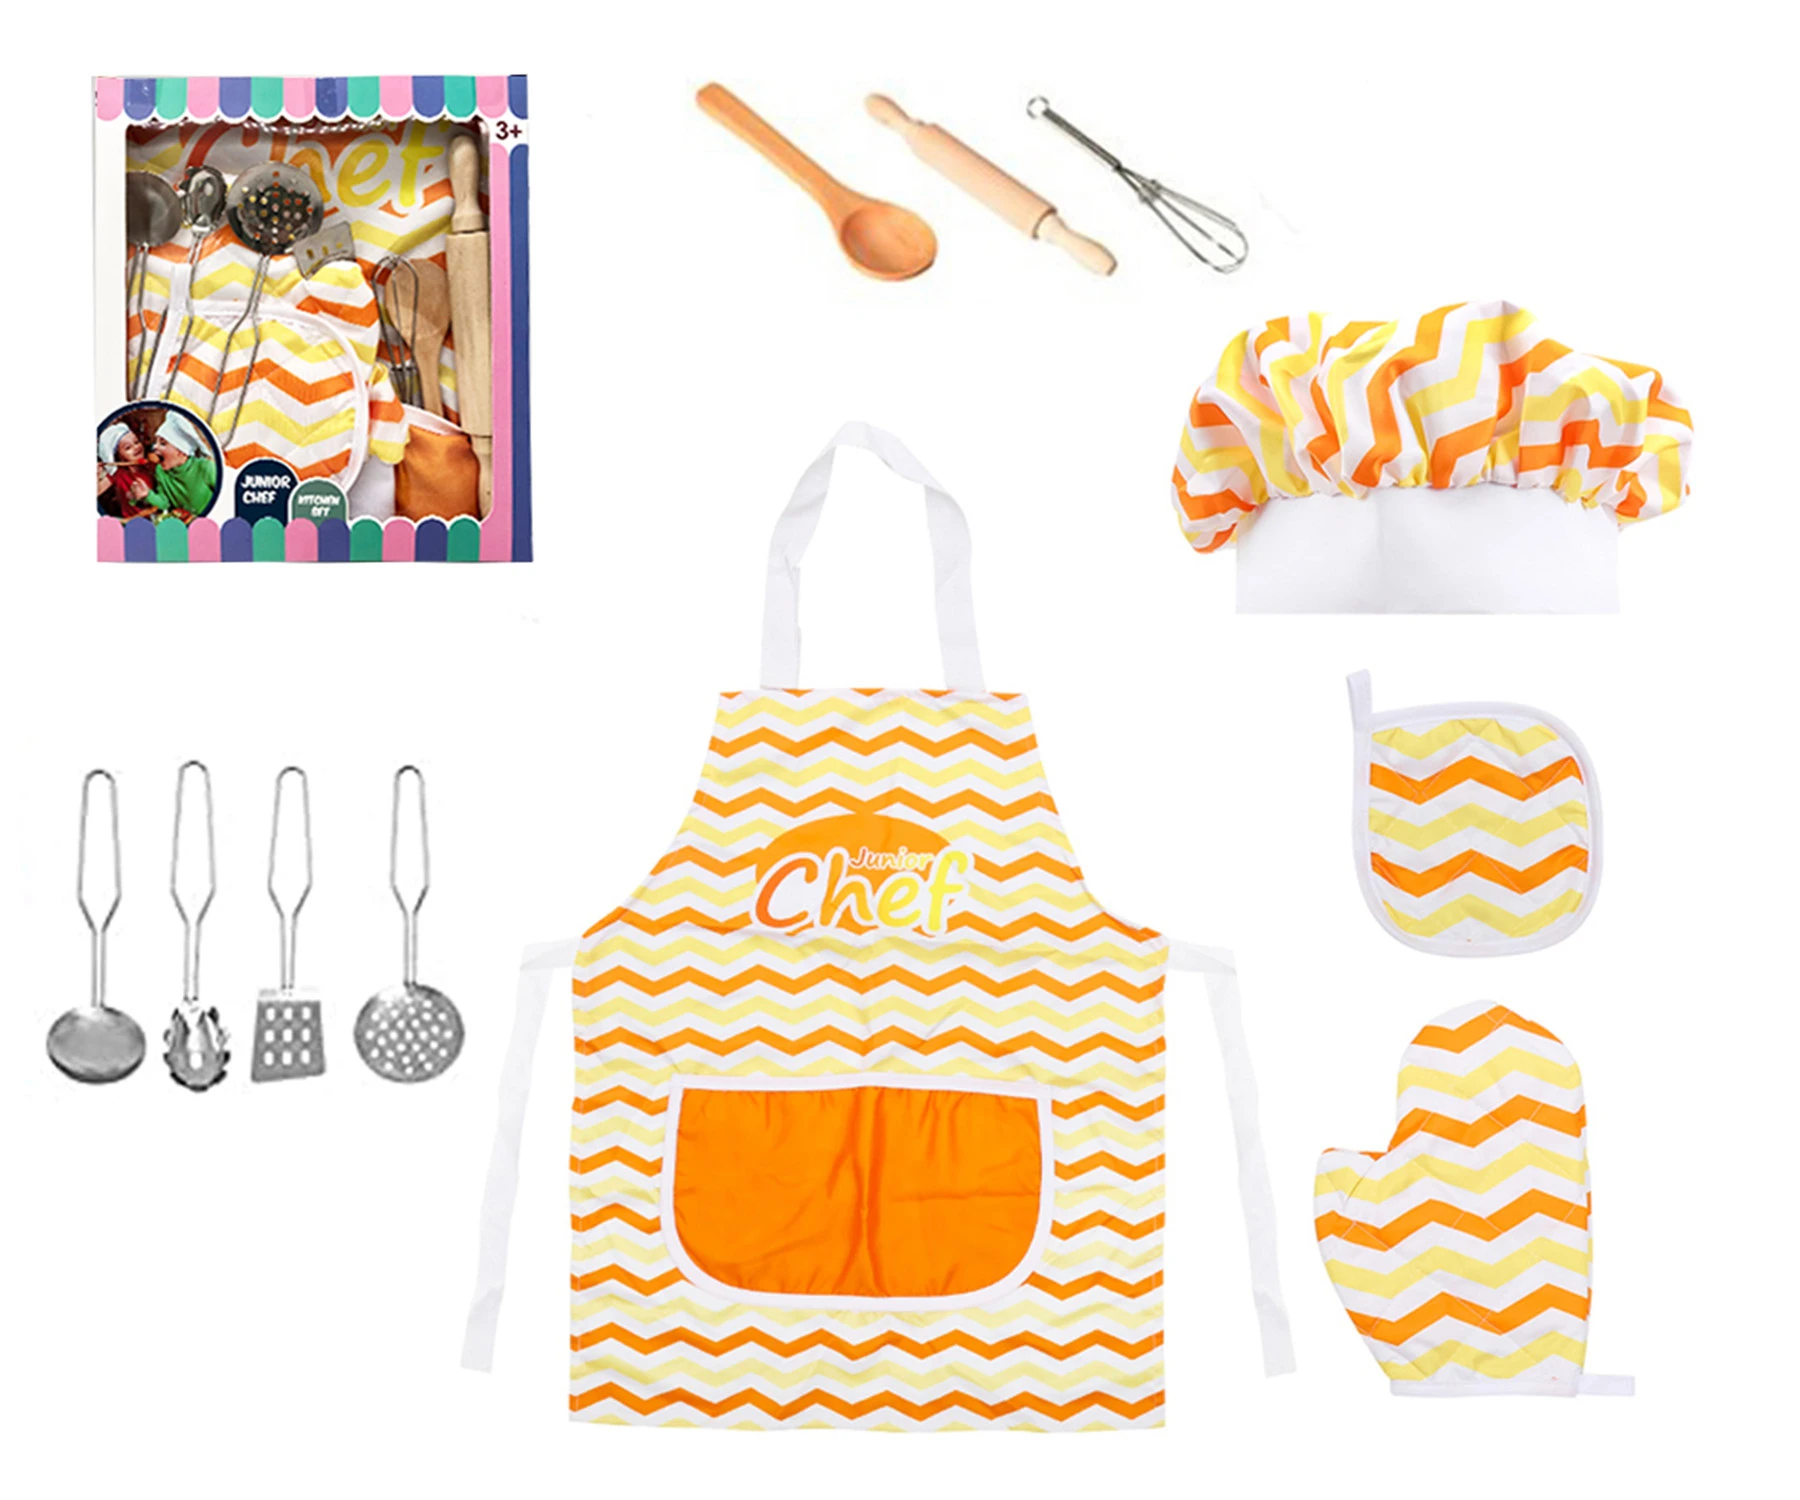 YINGNISI high quality 11-piece apron set role play kids apron and chef hat set